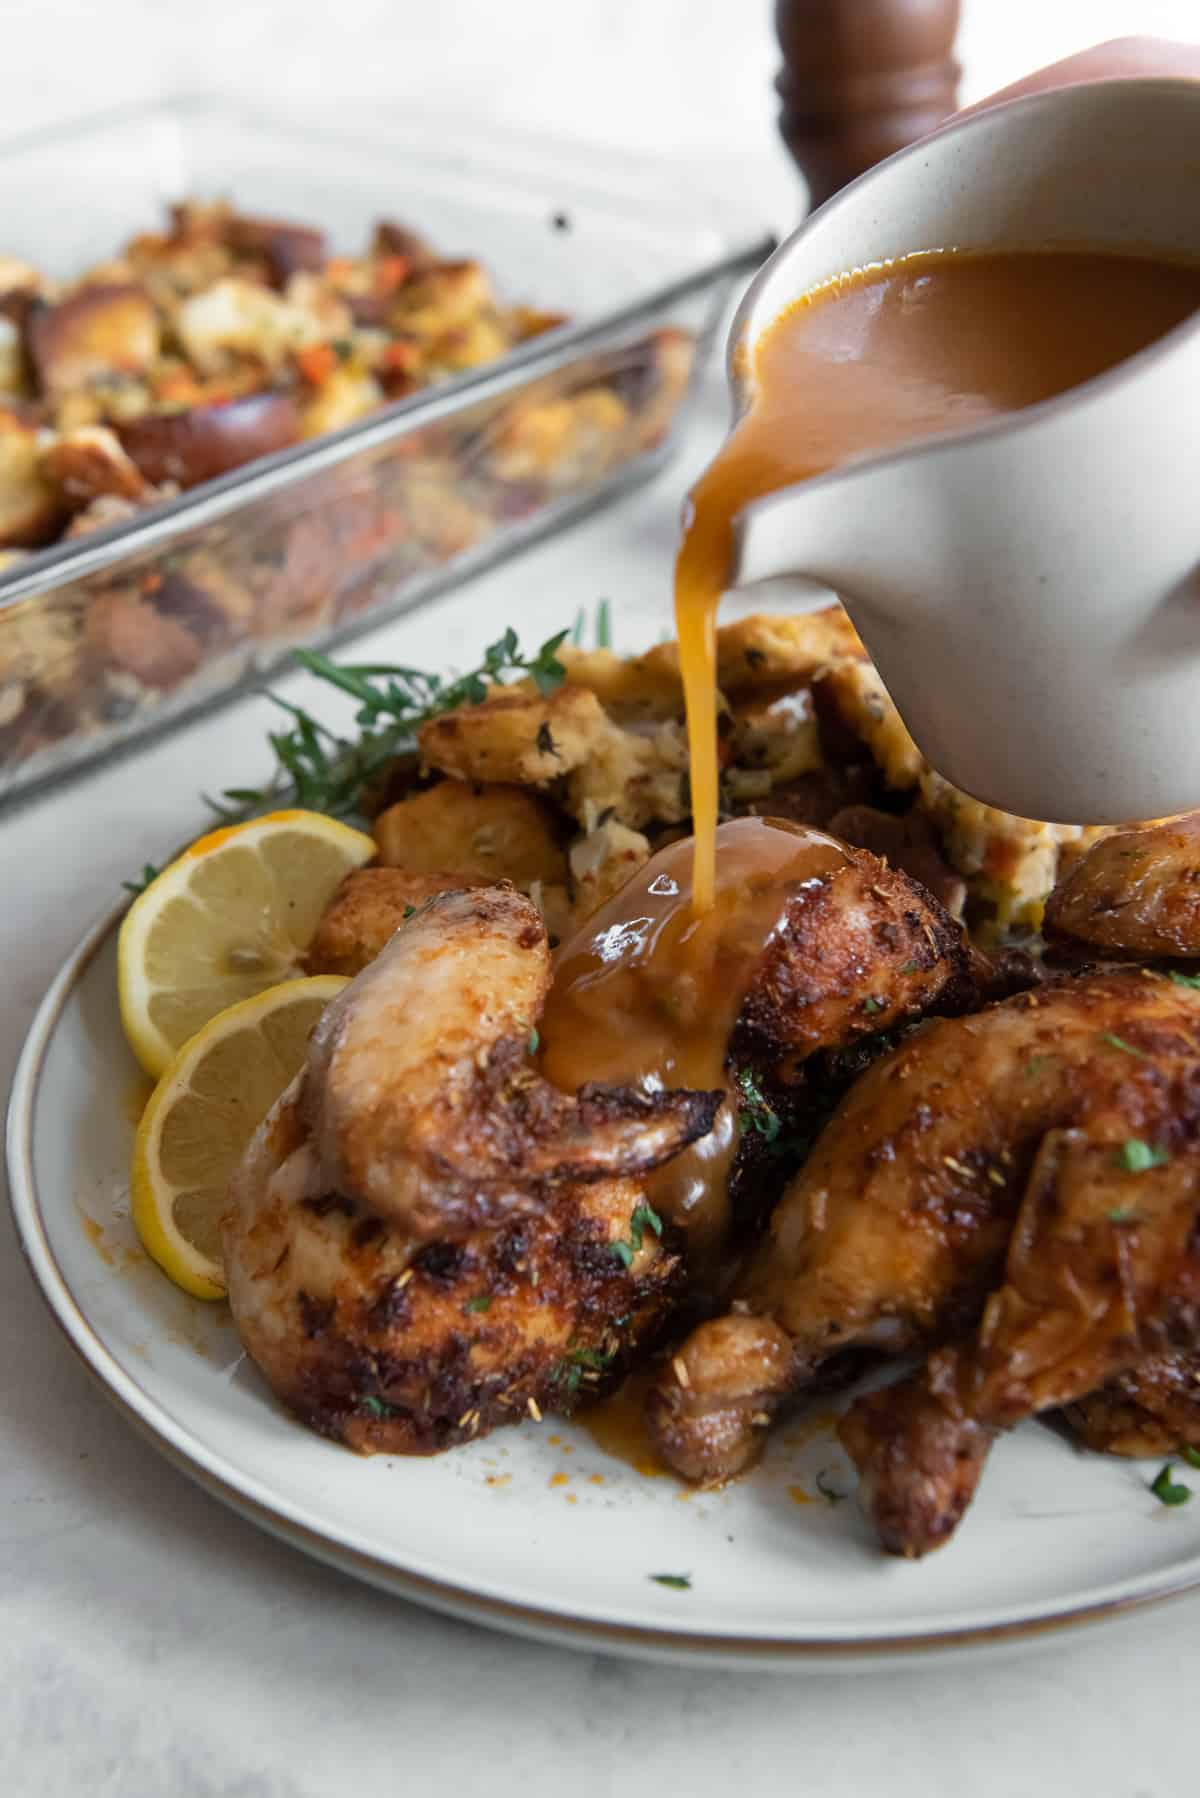 Gravy pouring from a gravy boat over cornish hens on a white plate.